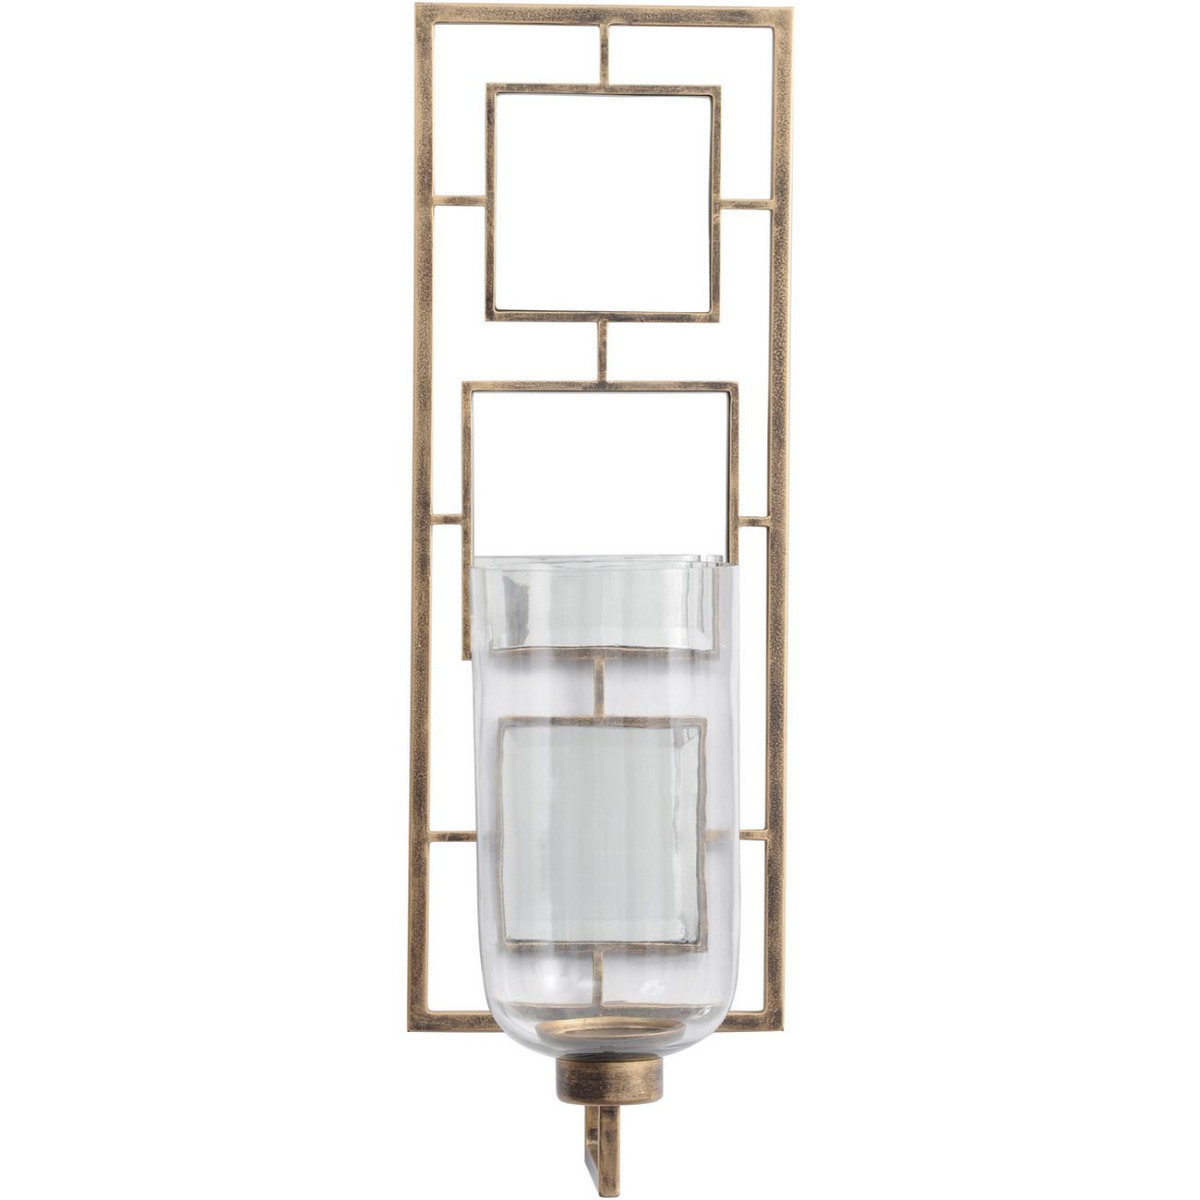 Occtaine Antique Gold Wall Sconce with Mirrored Back